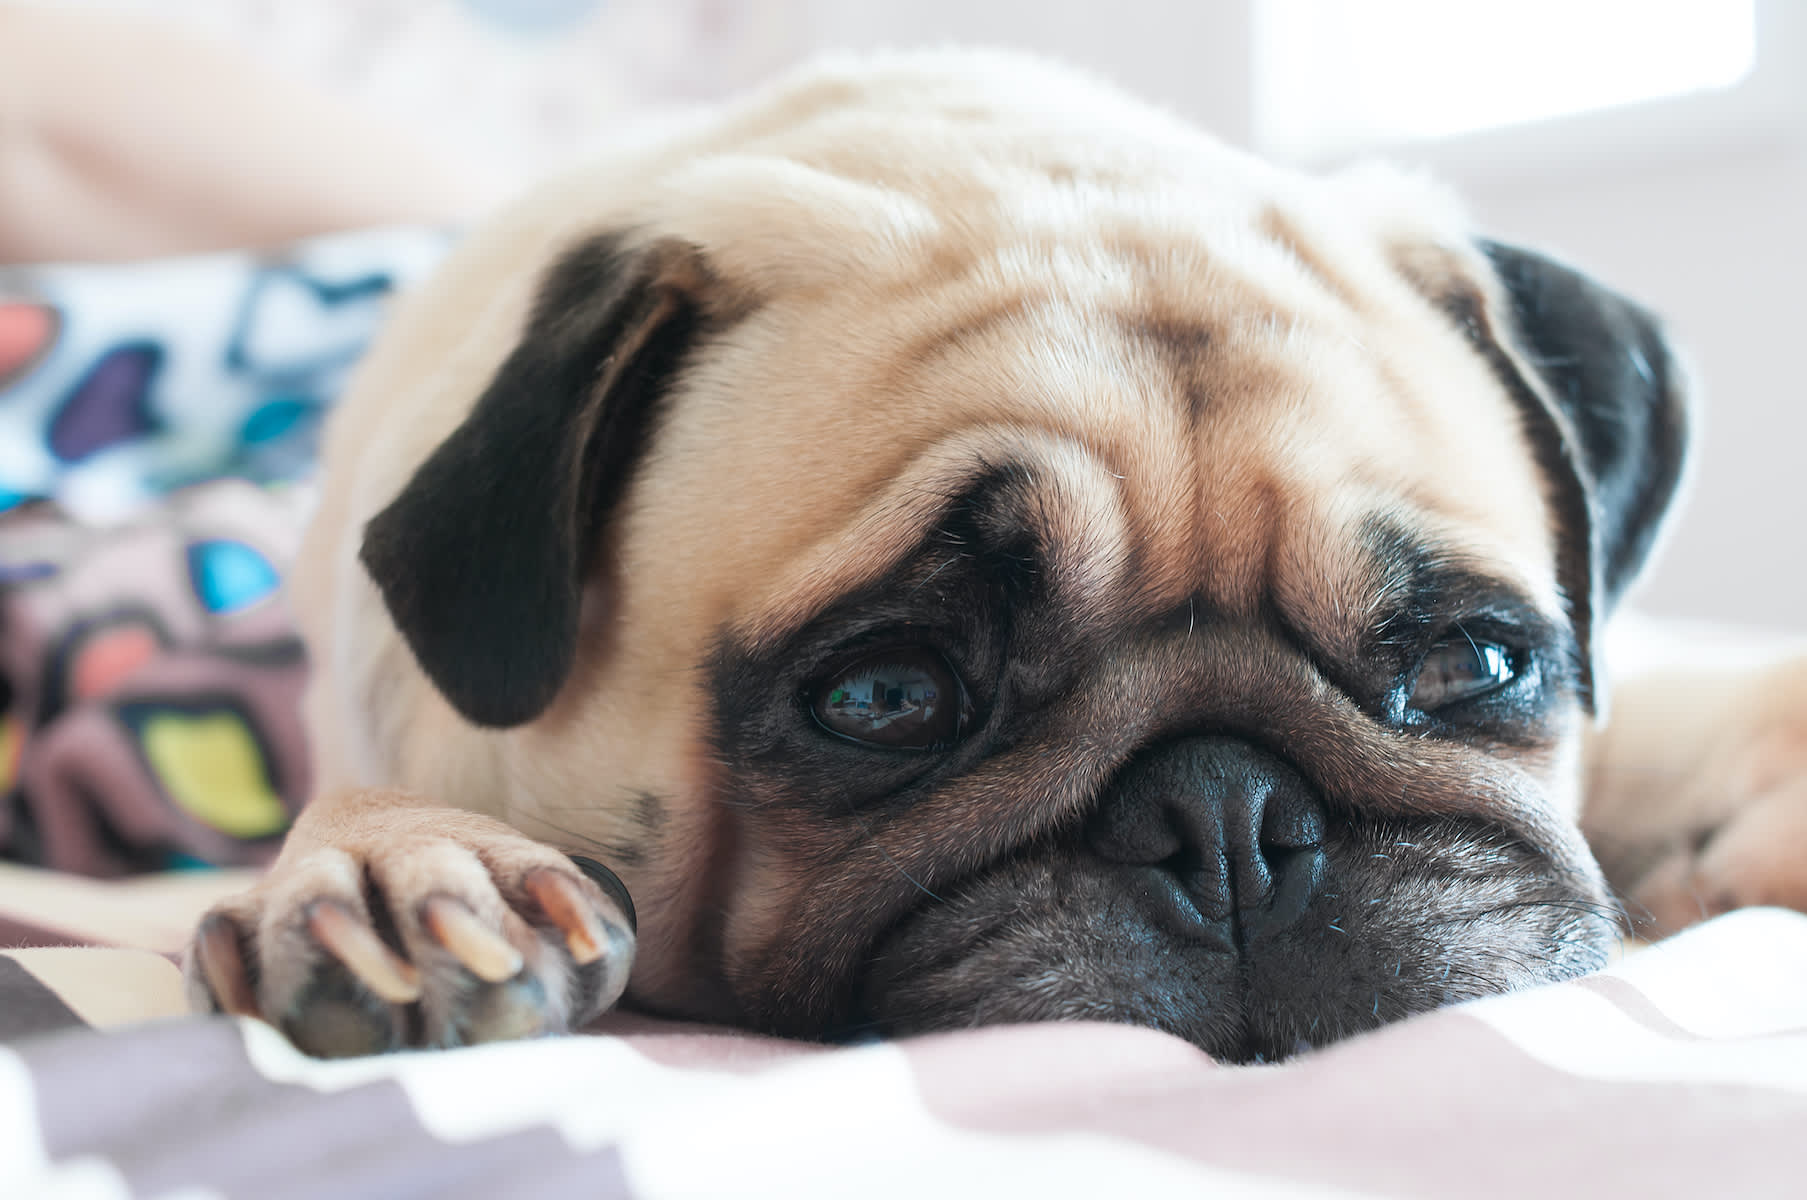 Canva - Cute pug puppy dog sleeping on the bed